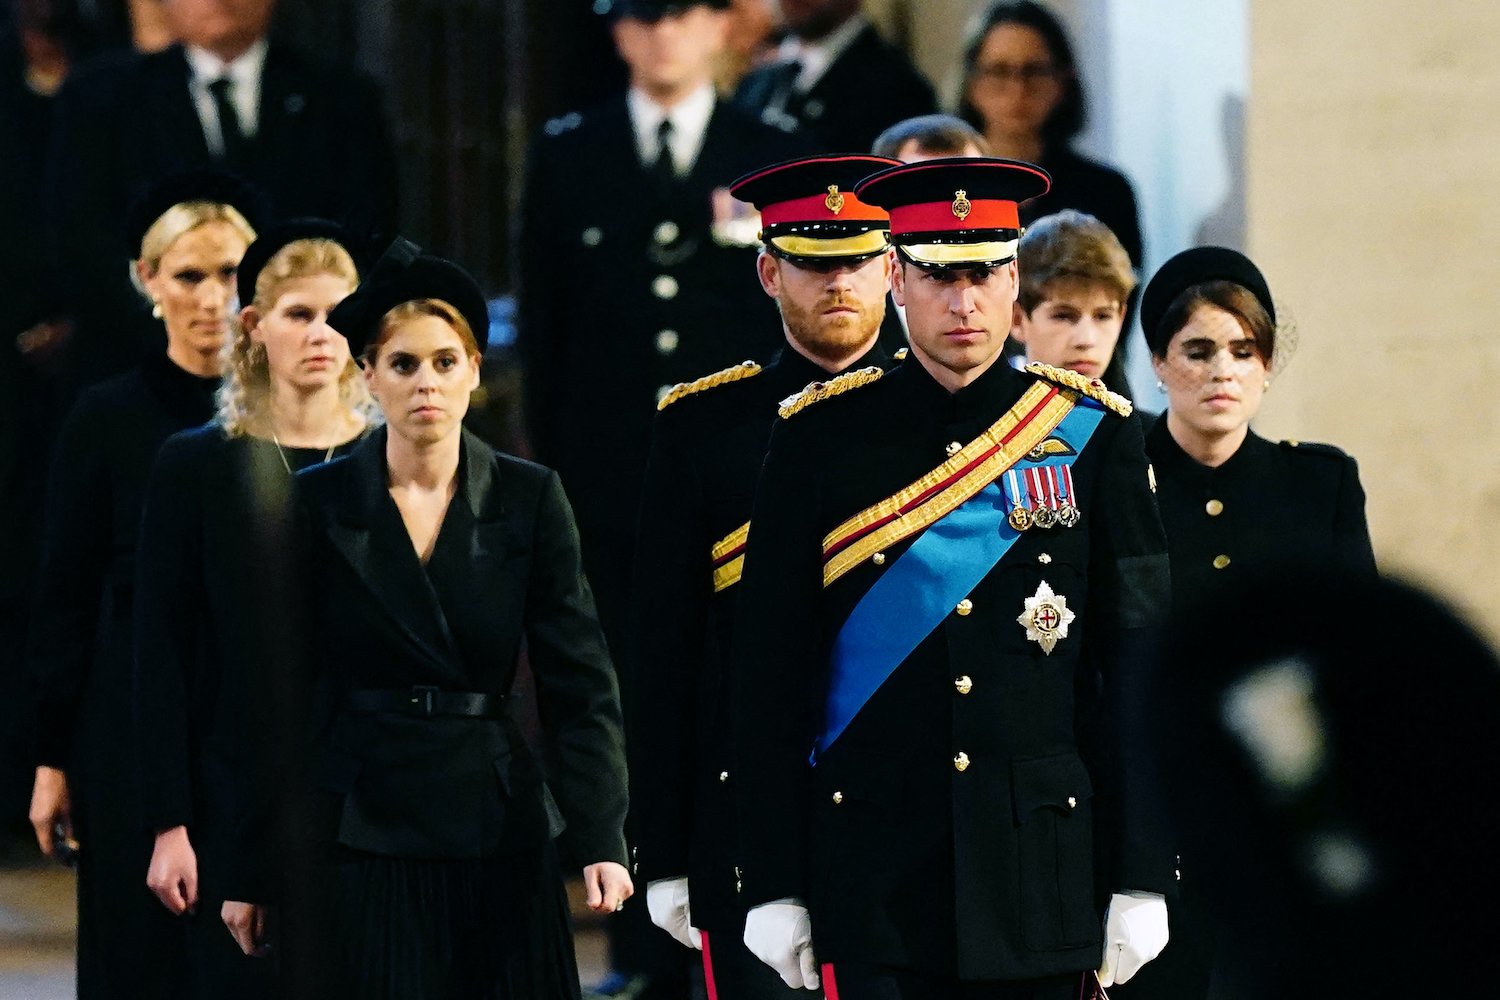 Prince William, Prince Harry and cousins' body languge at queen vigil was revealing